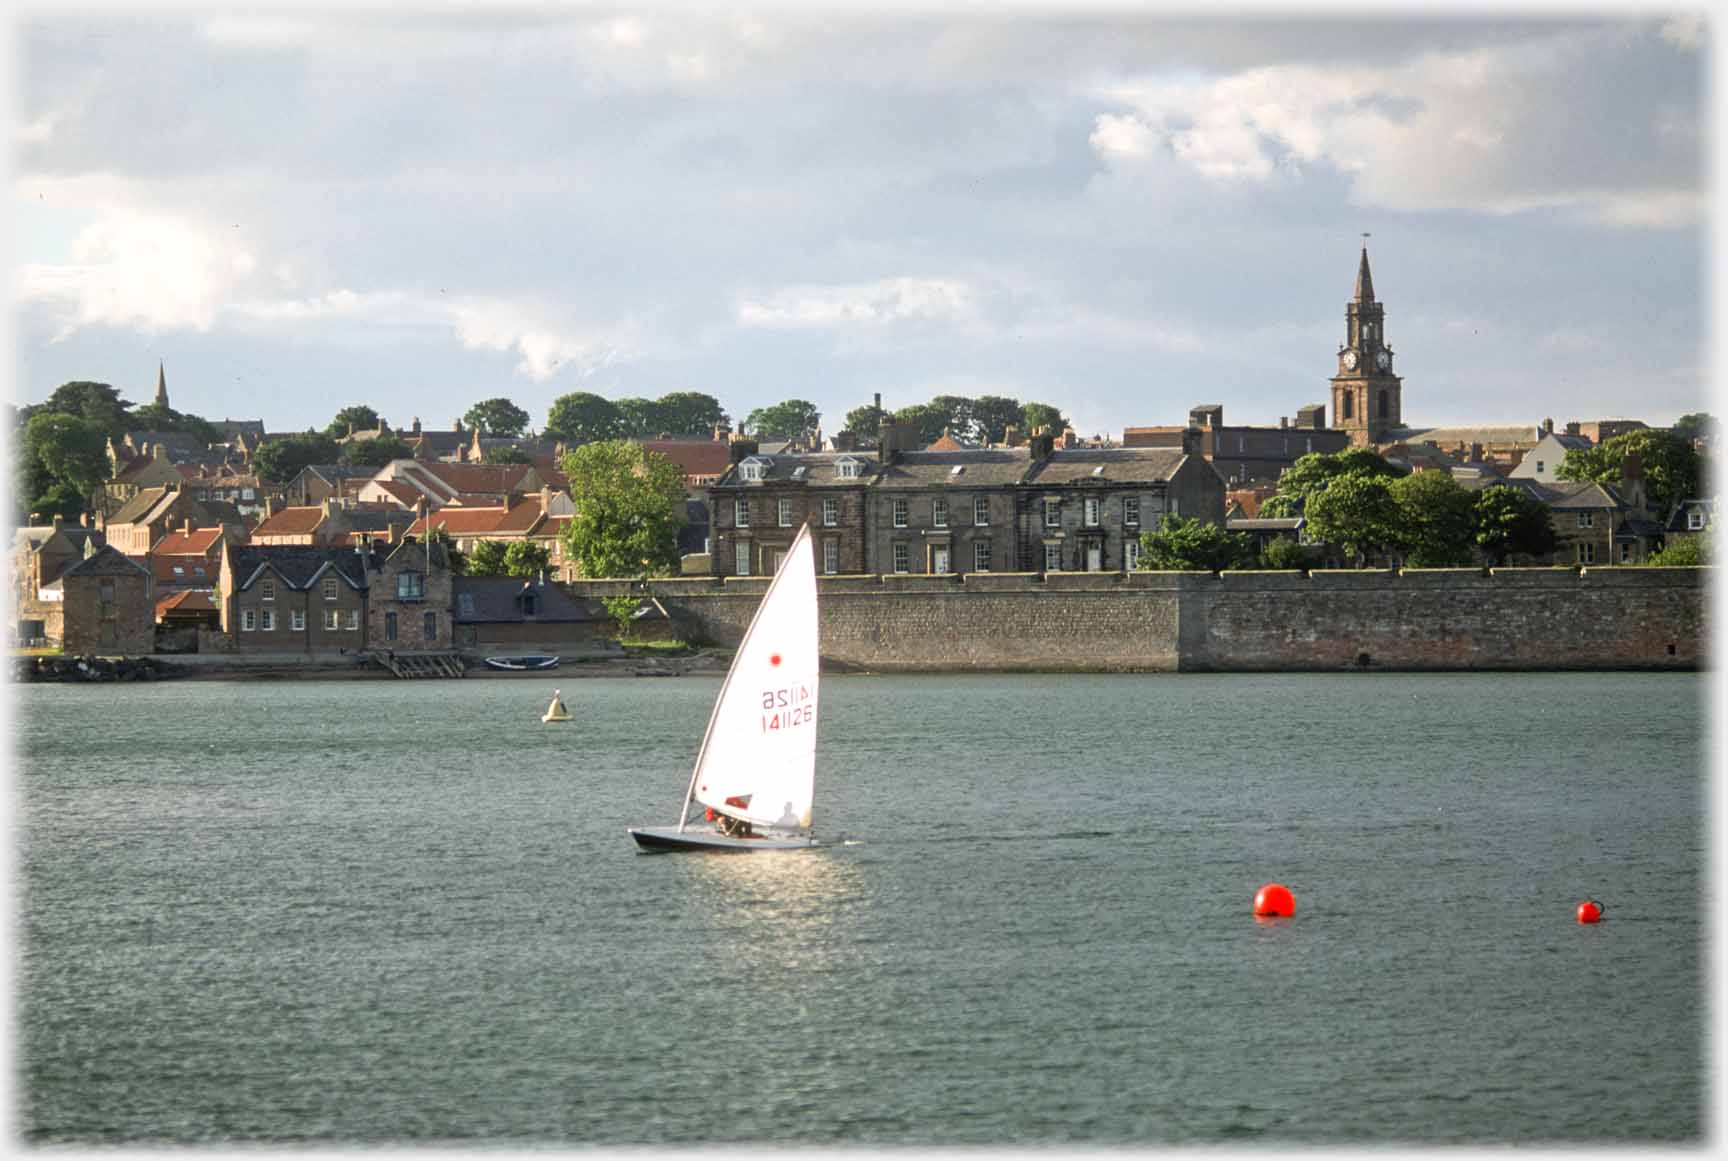 Sailing dinghy with town buildings behind.